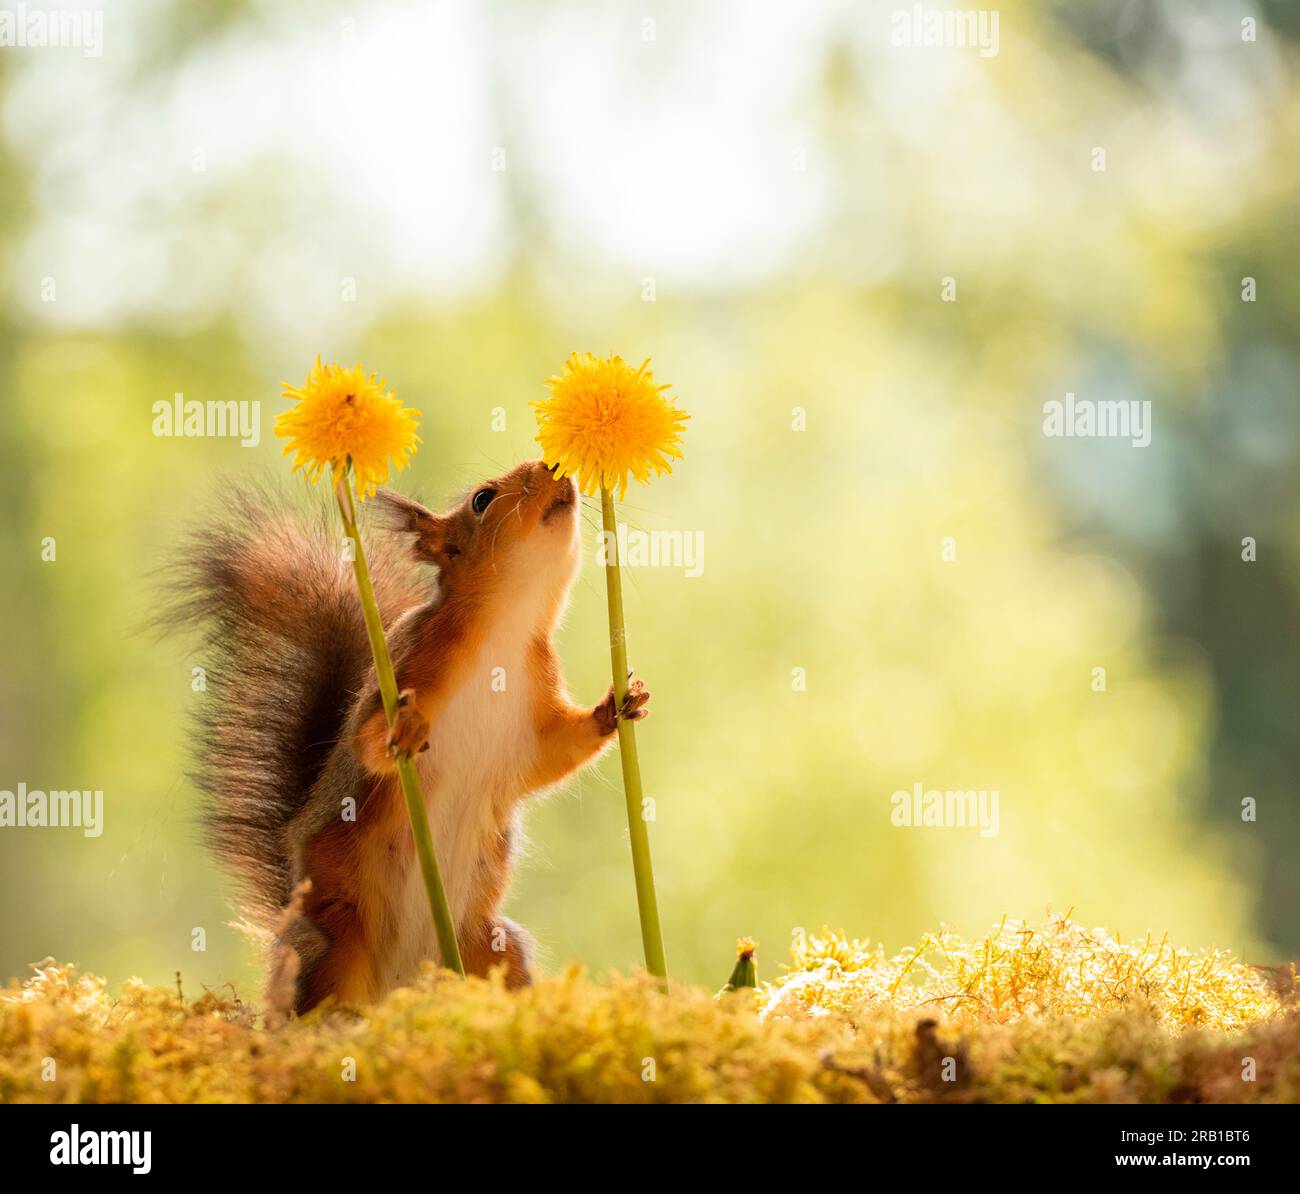 Red squirrel with dandelion flowers Stock Photo